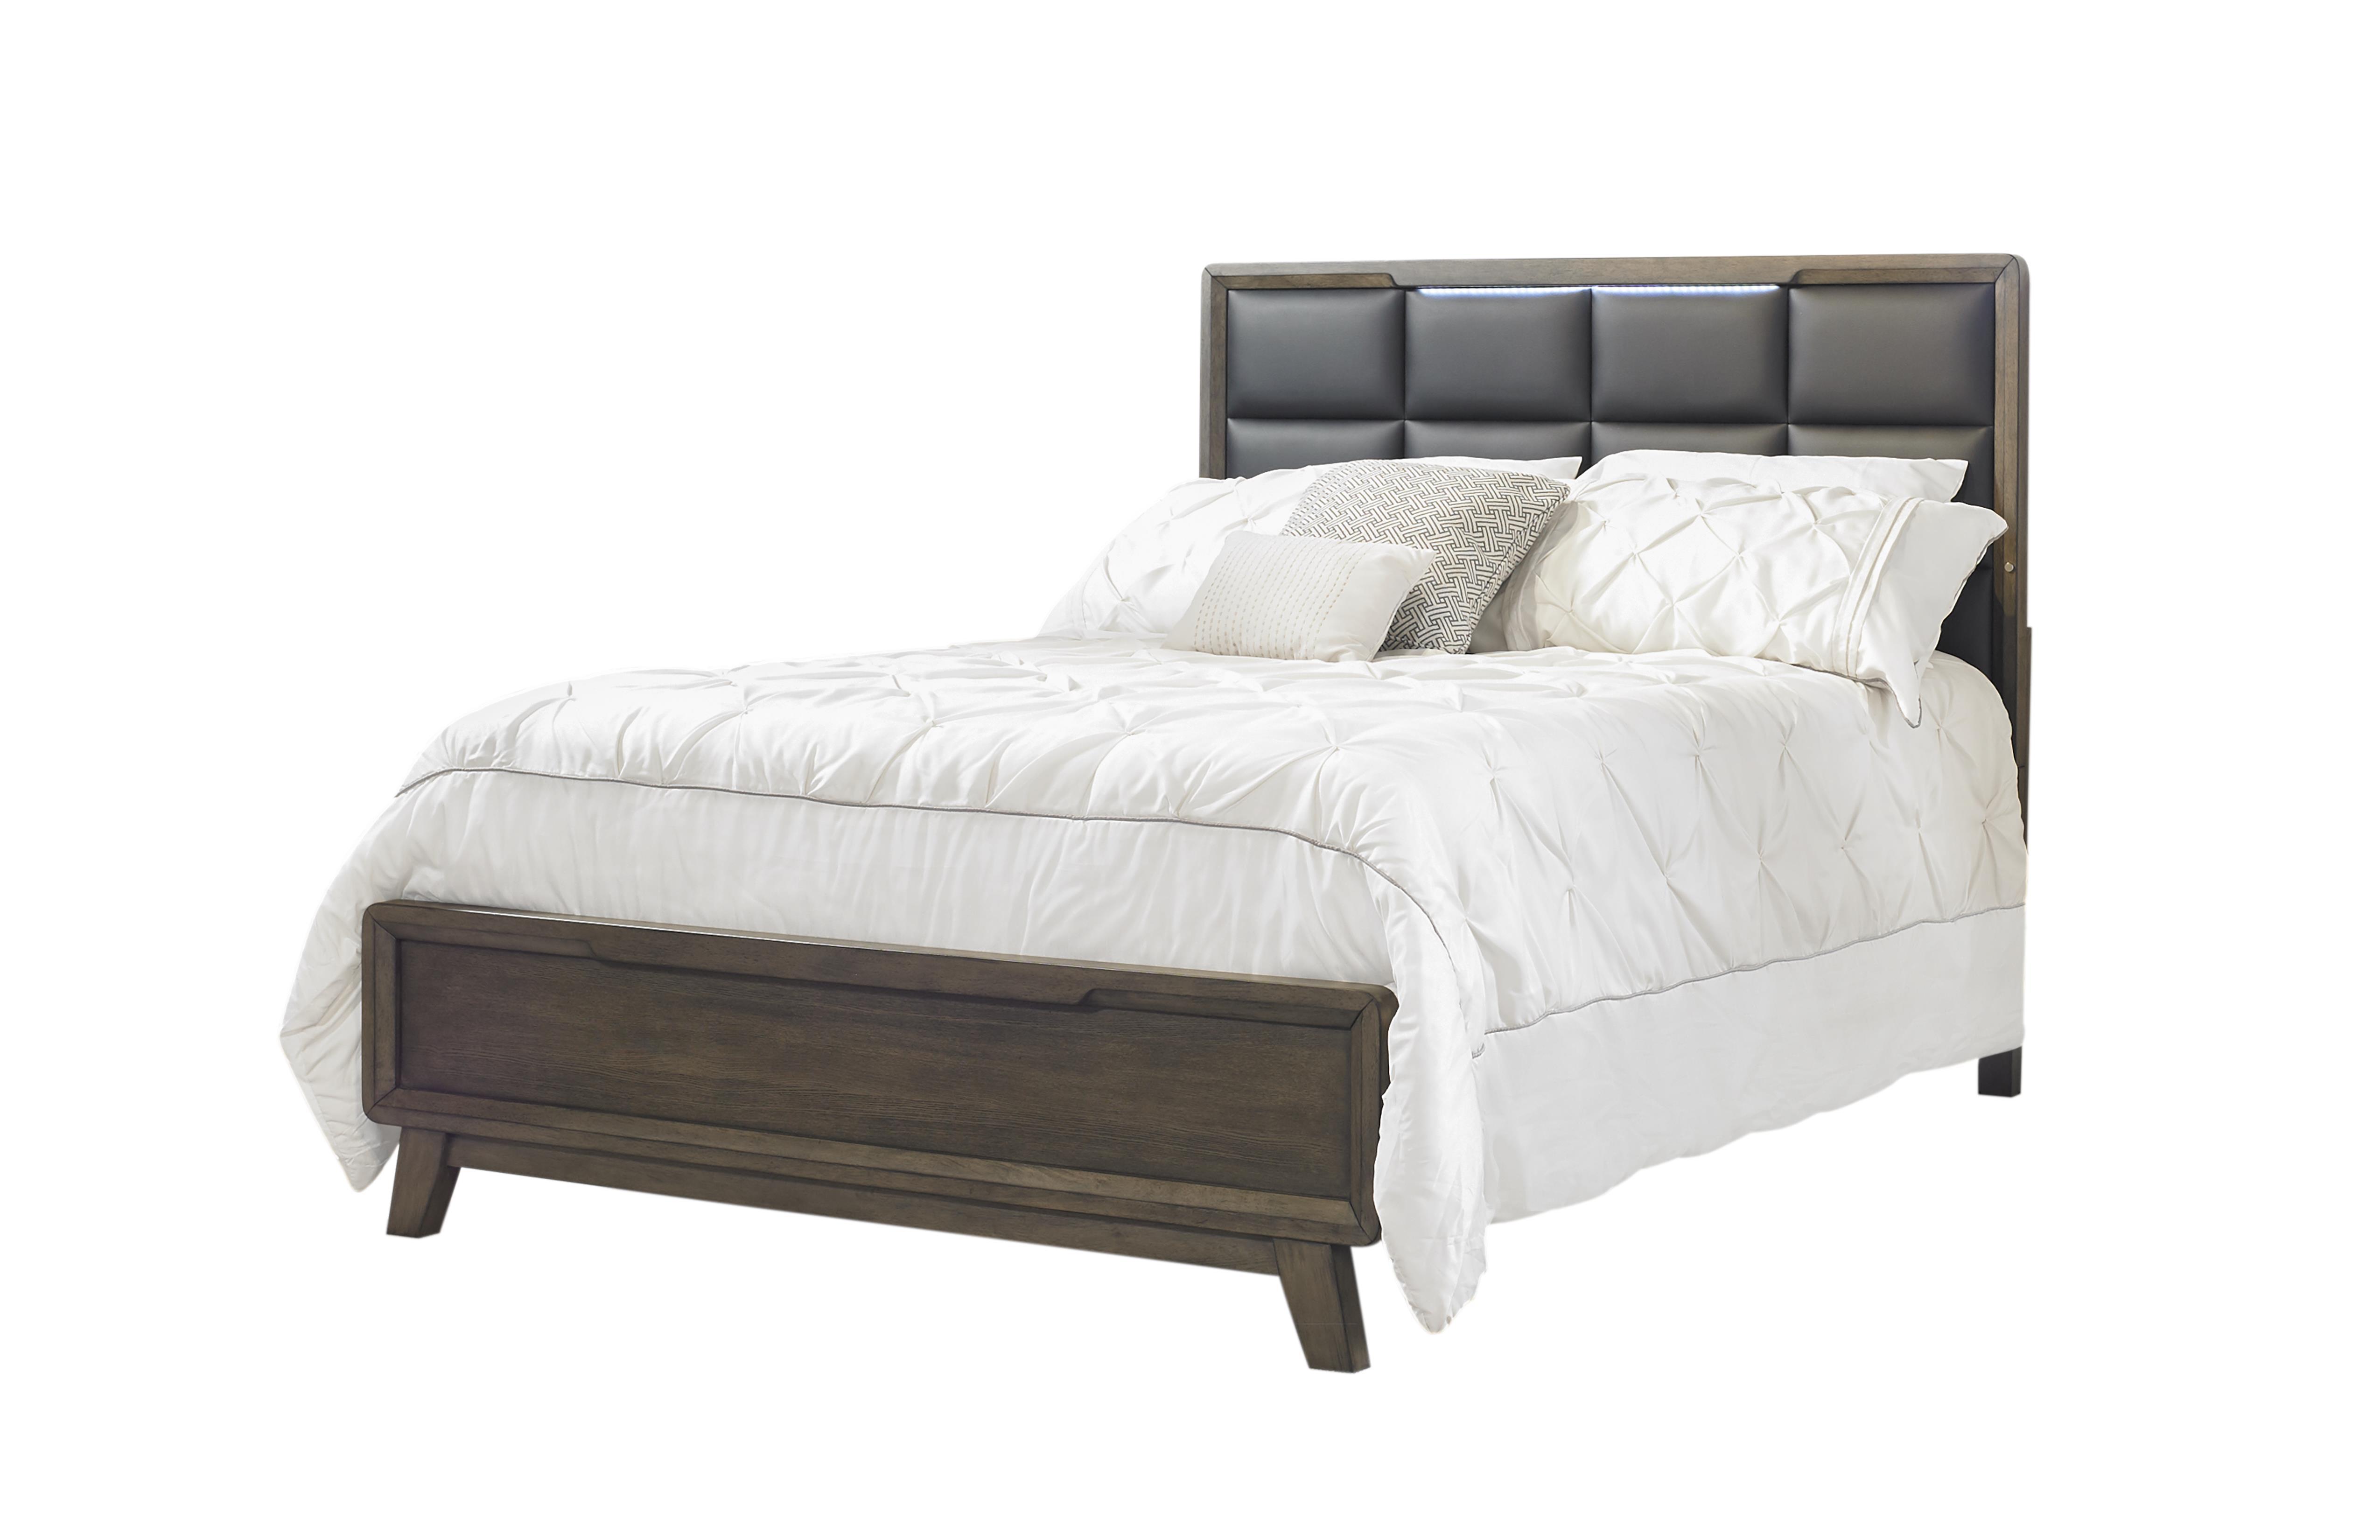 Contemporary, Modern Panel Bedroom Set VALENCIA 213-105-Set-3 213-105-2N-3PC in Coffee, Brown Faux Leather